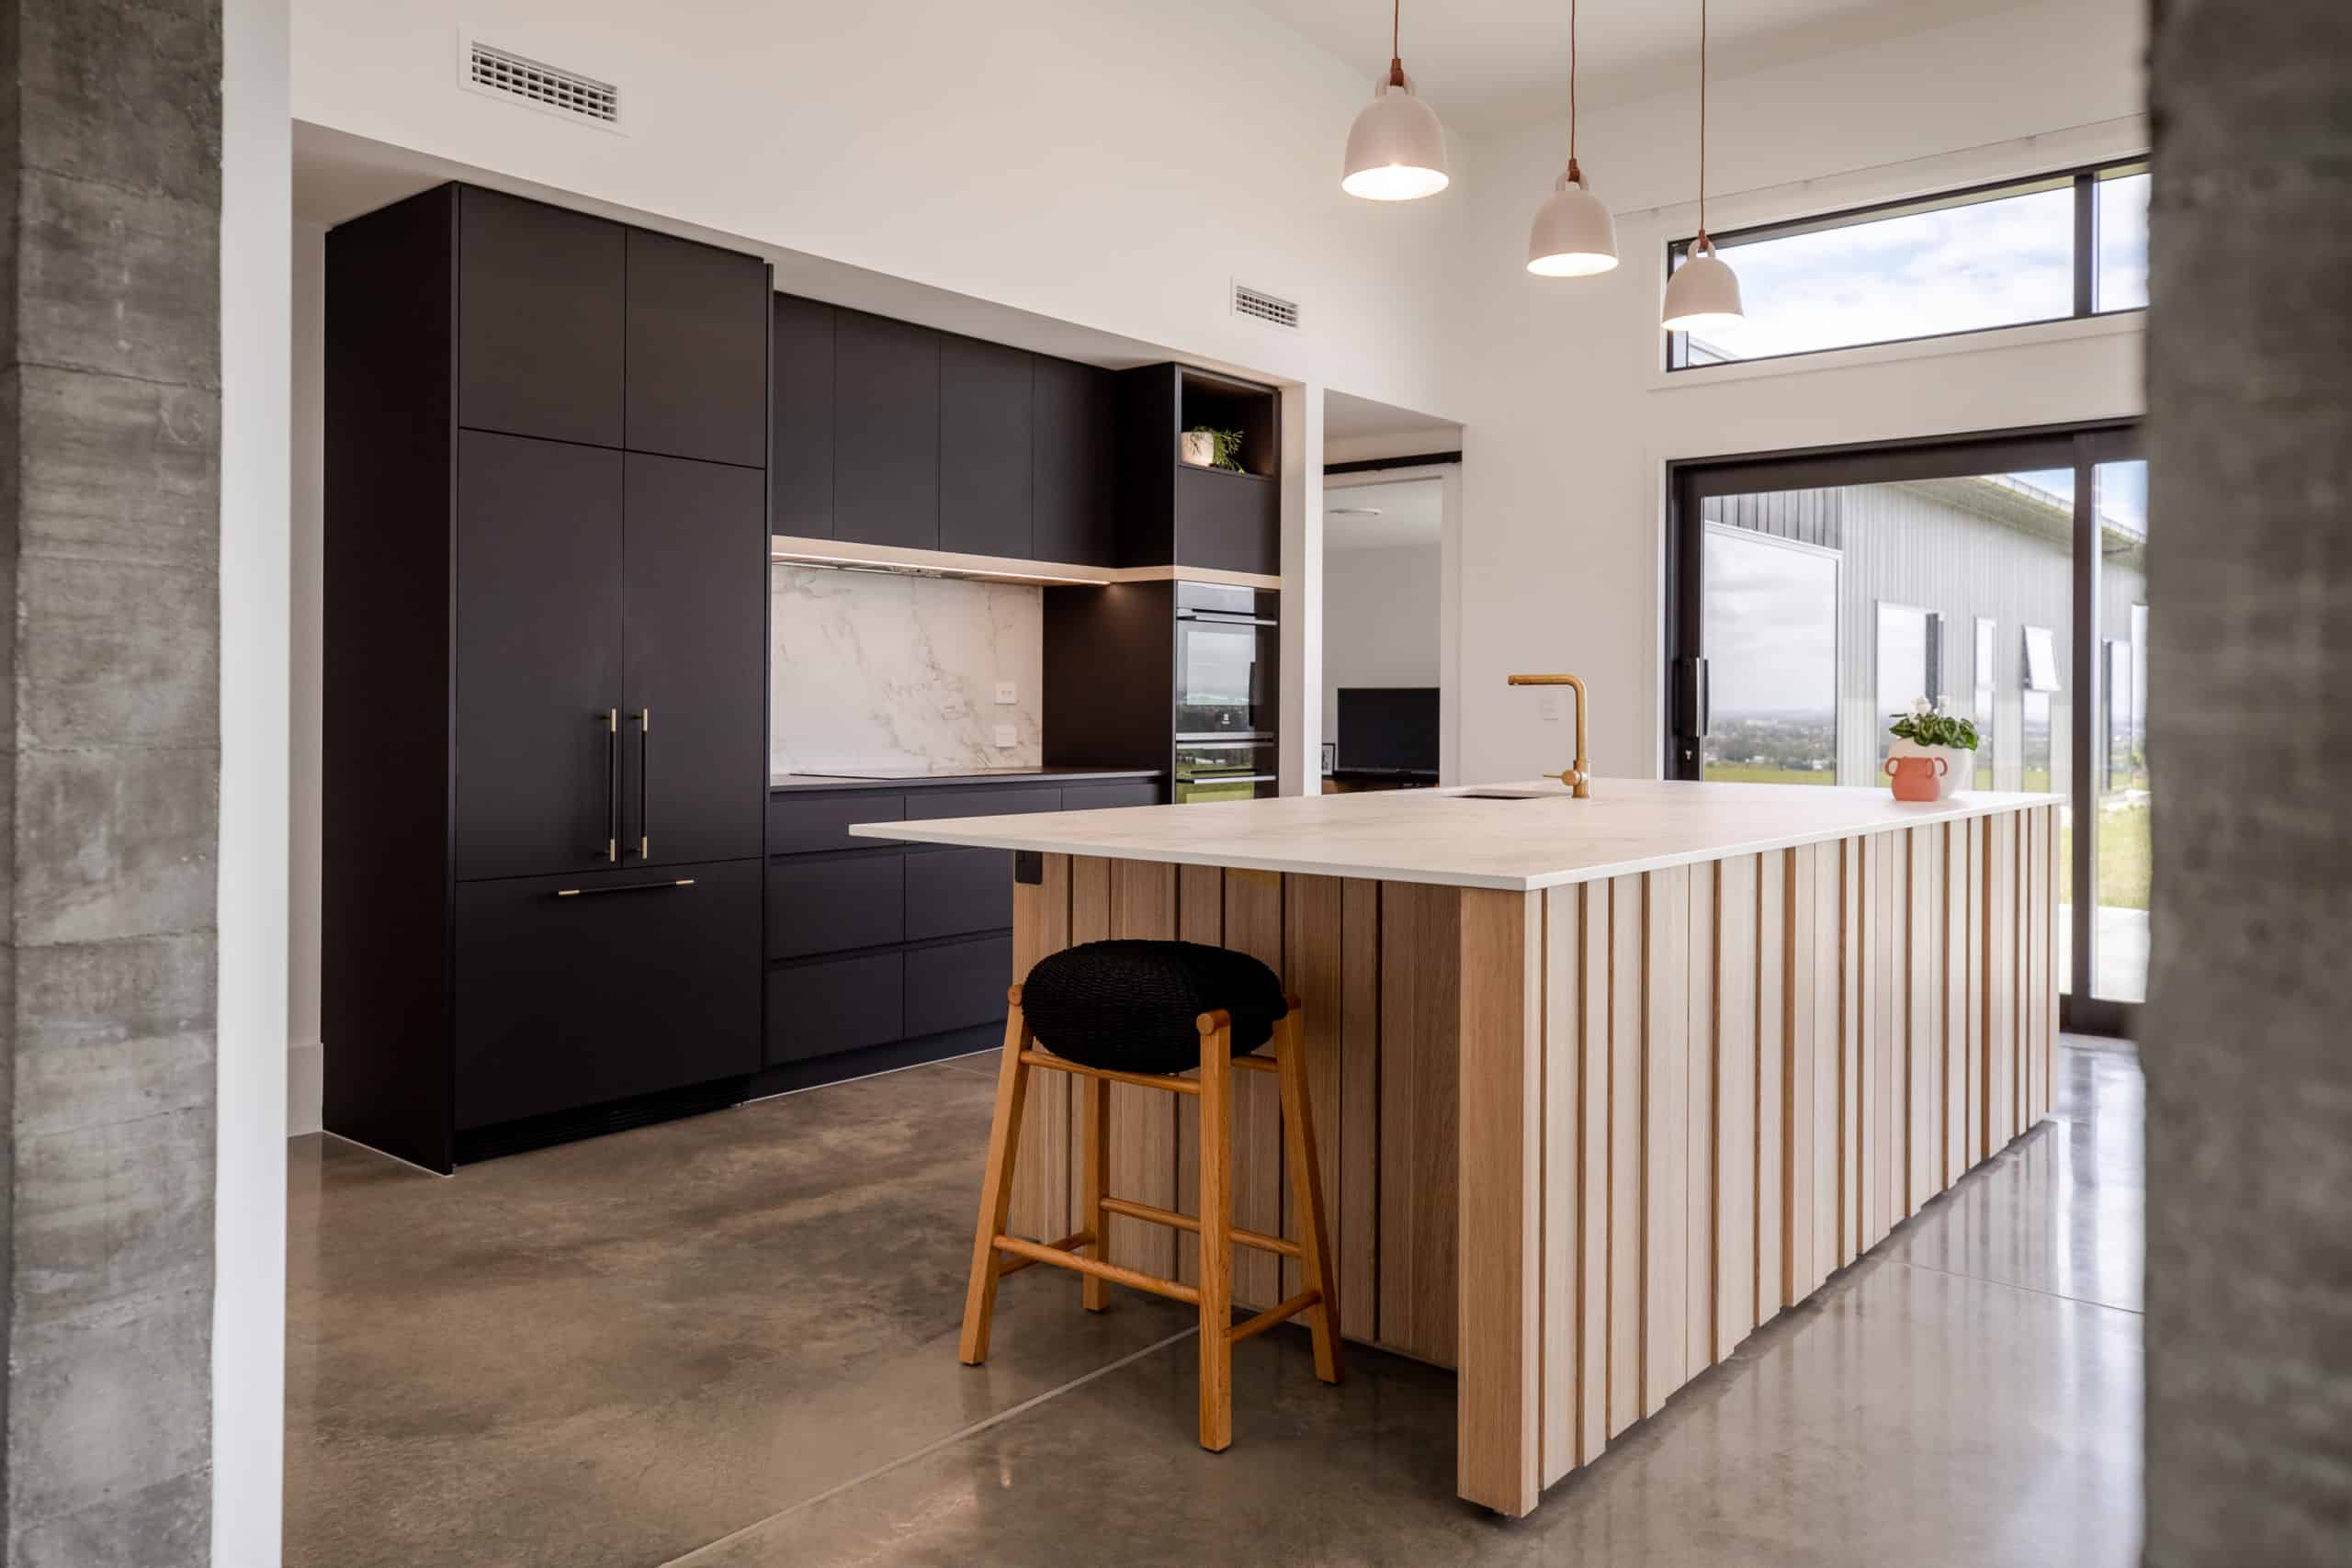 Matte black kitchen using Avantech You with vertical wooden panelling on kitchen island